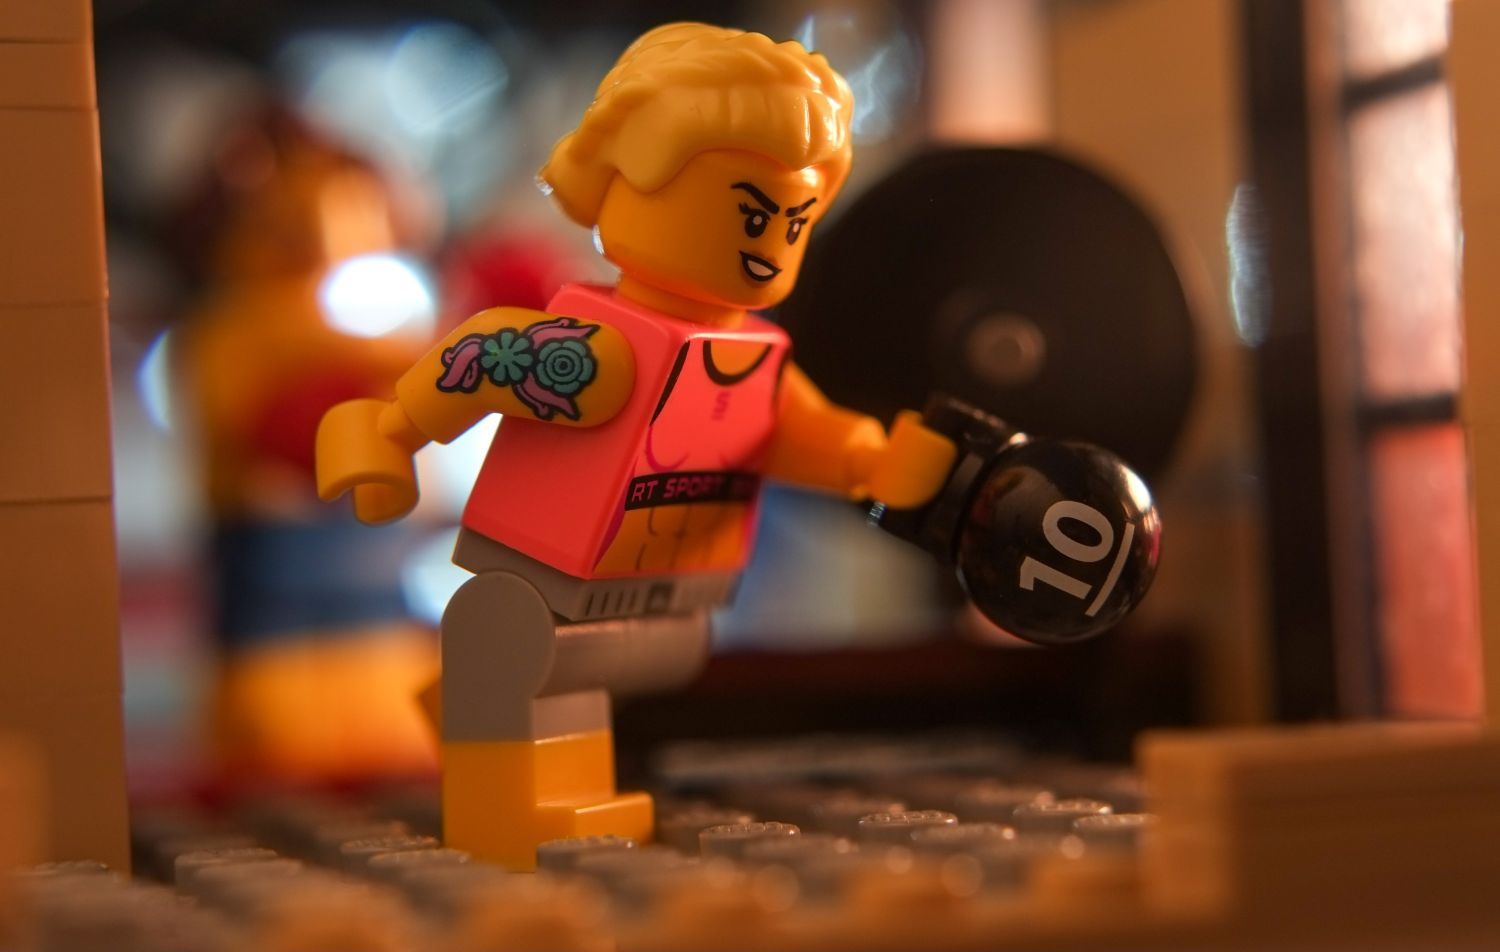 A LEGO Fitness Instructor during workout with kettlebell.